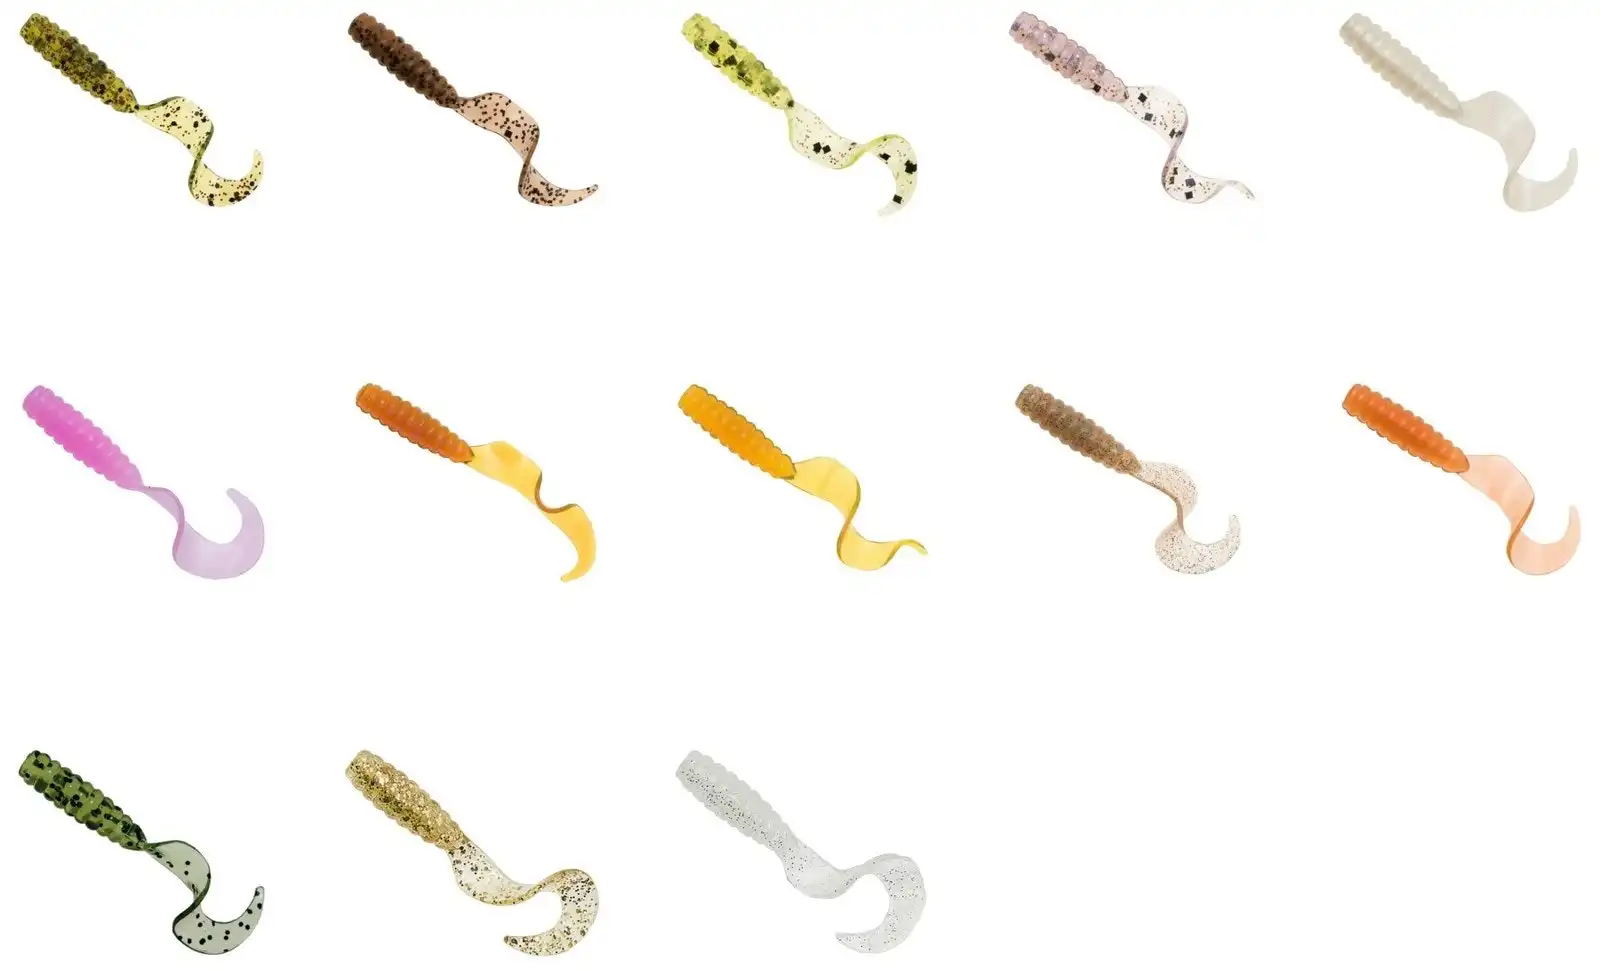 Zman 2 Inch Grubz Soft Plastic Lures - 8 Pack of Z Man Soft Plastic Lures